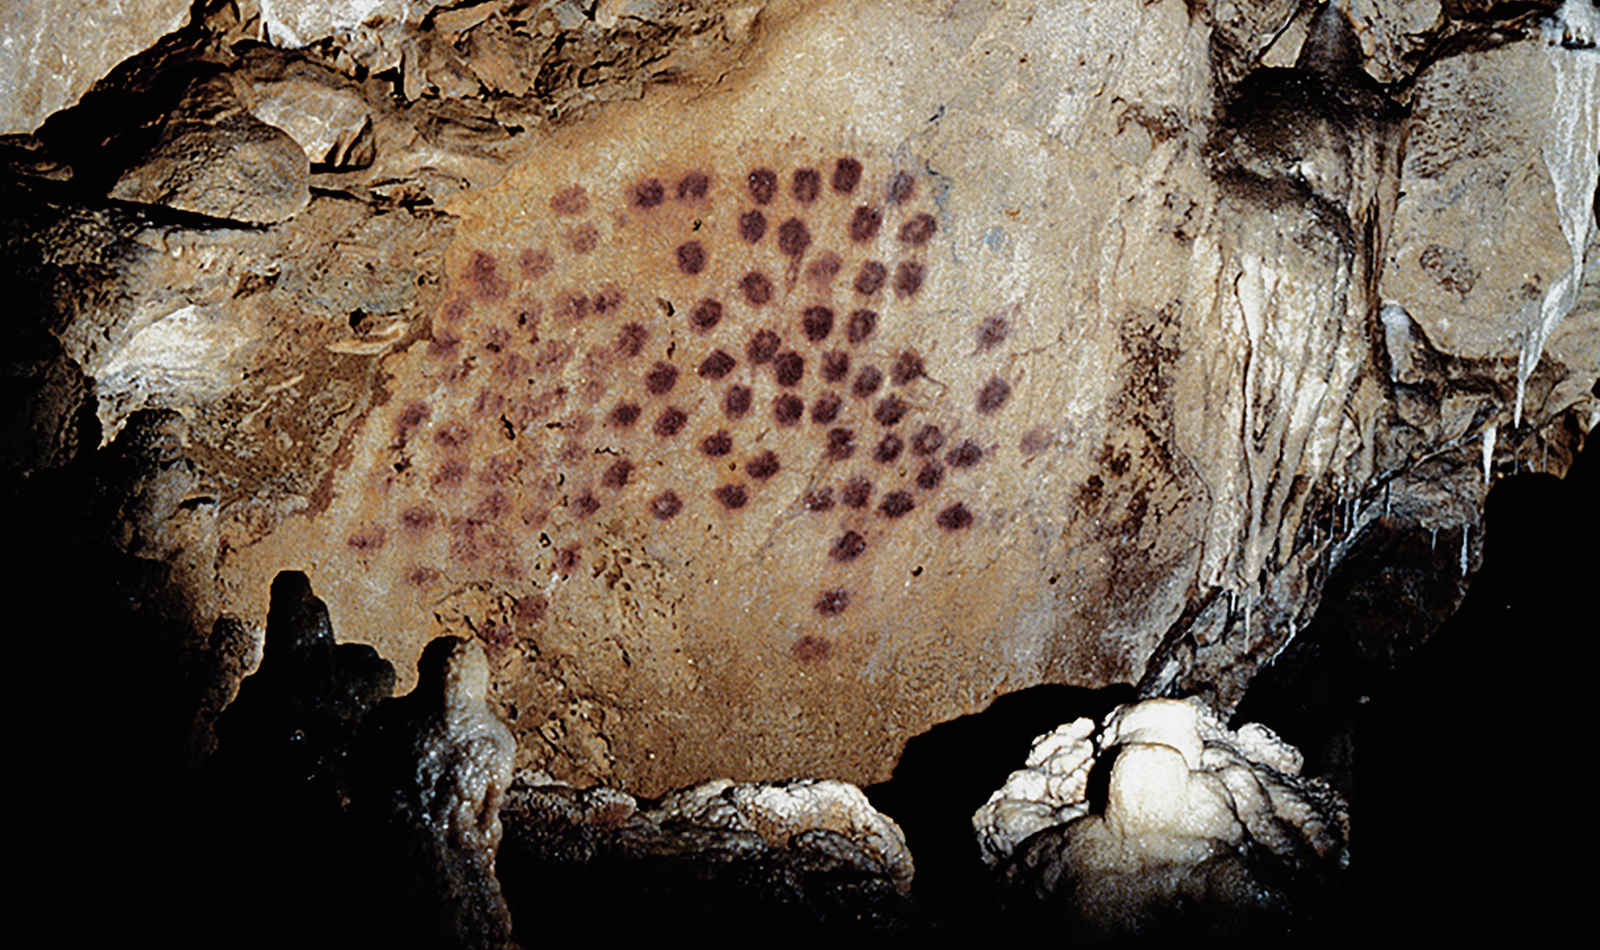 Panel of Red Dots Chauvet Cave Paintings Rock Art France Bradshaw Foundation